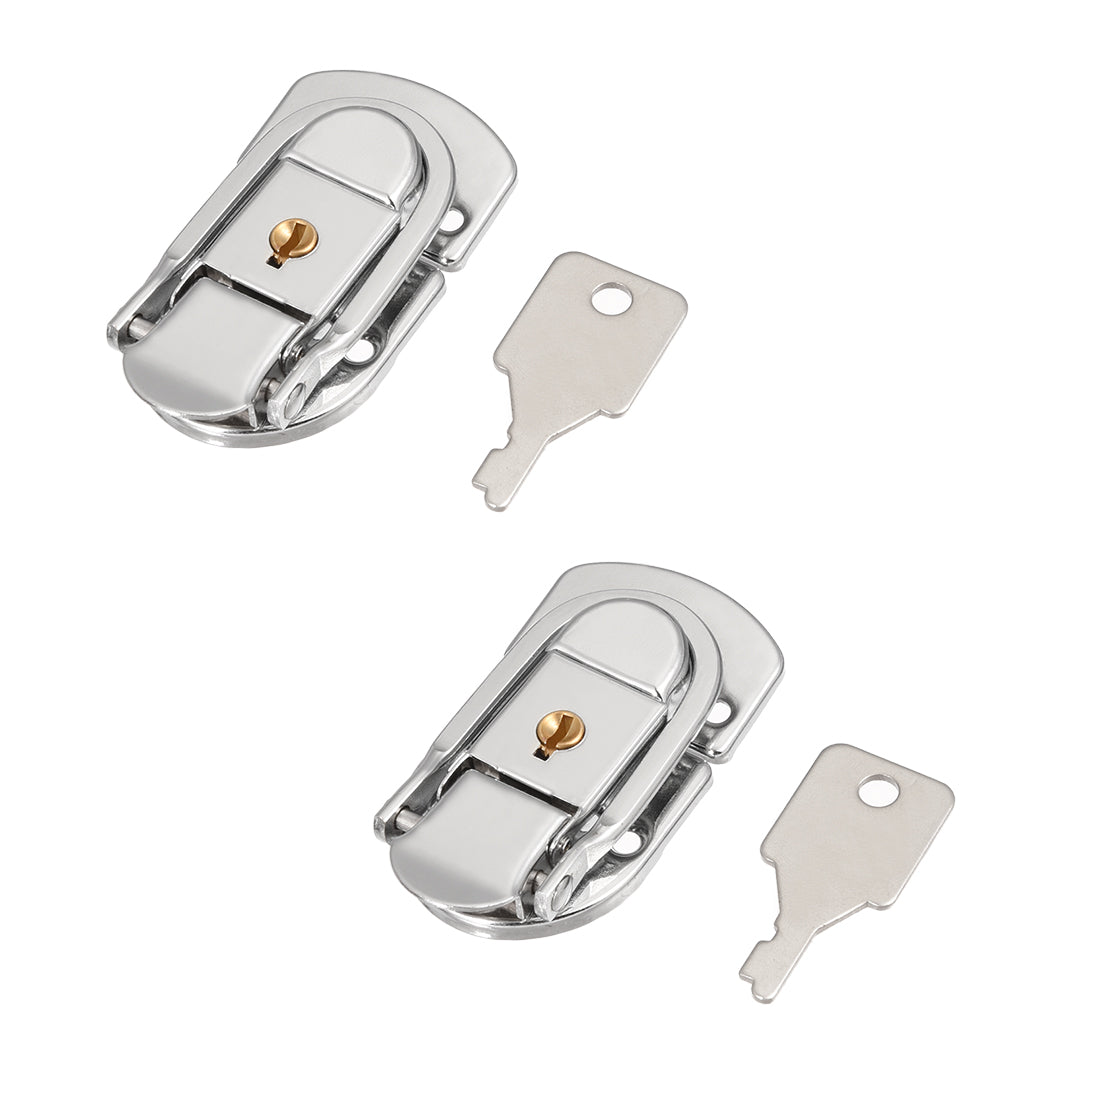 uxcell Uxcell 66mm x 34mm Metal Small Size Suitcase Lock Hasp Catch Latch with Keys 2 Pcs